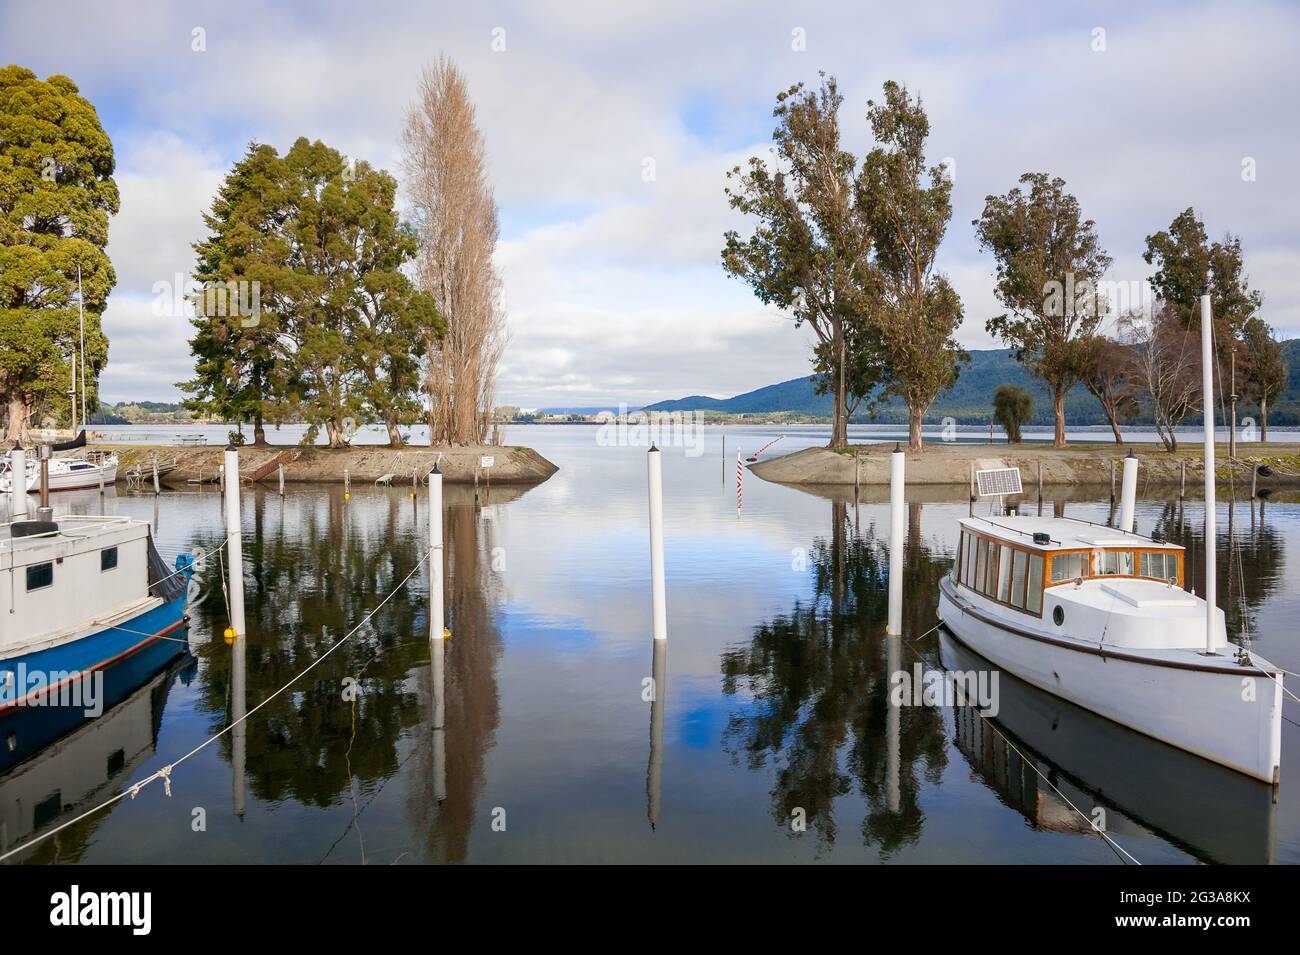 Te Anau Marina, Fiordland, New Zealand. Tranquil scene, leisure boats moored on a lake with reflections in calm water Stock Photo